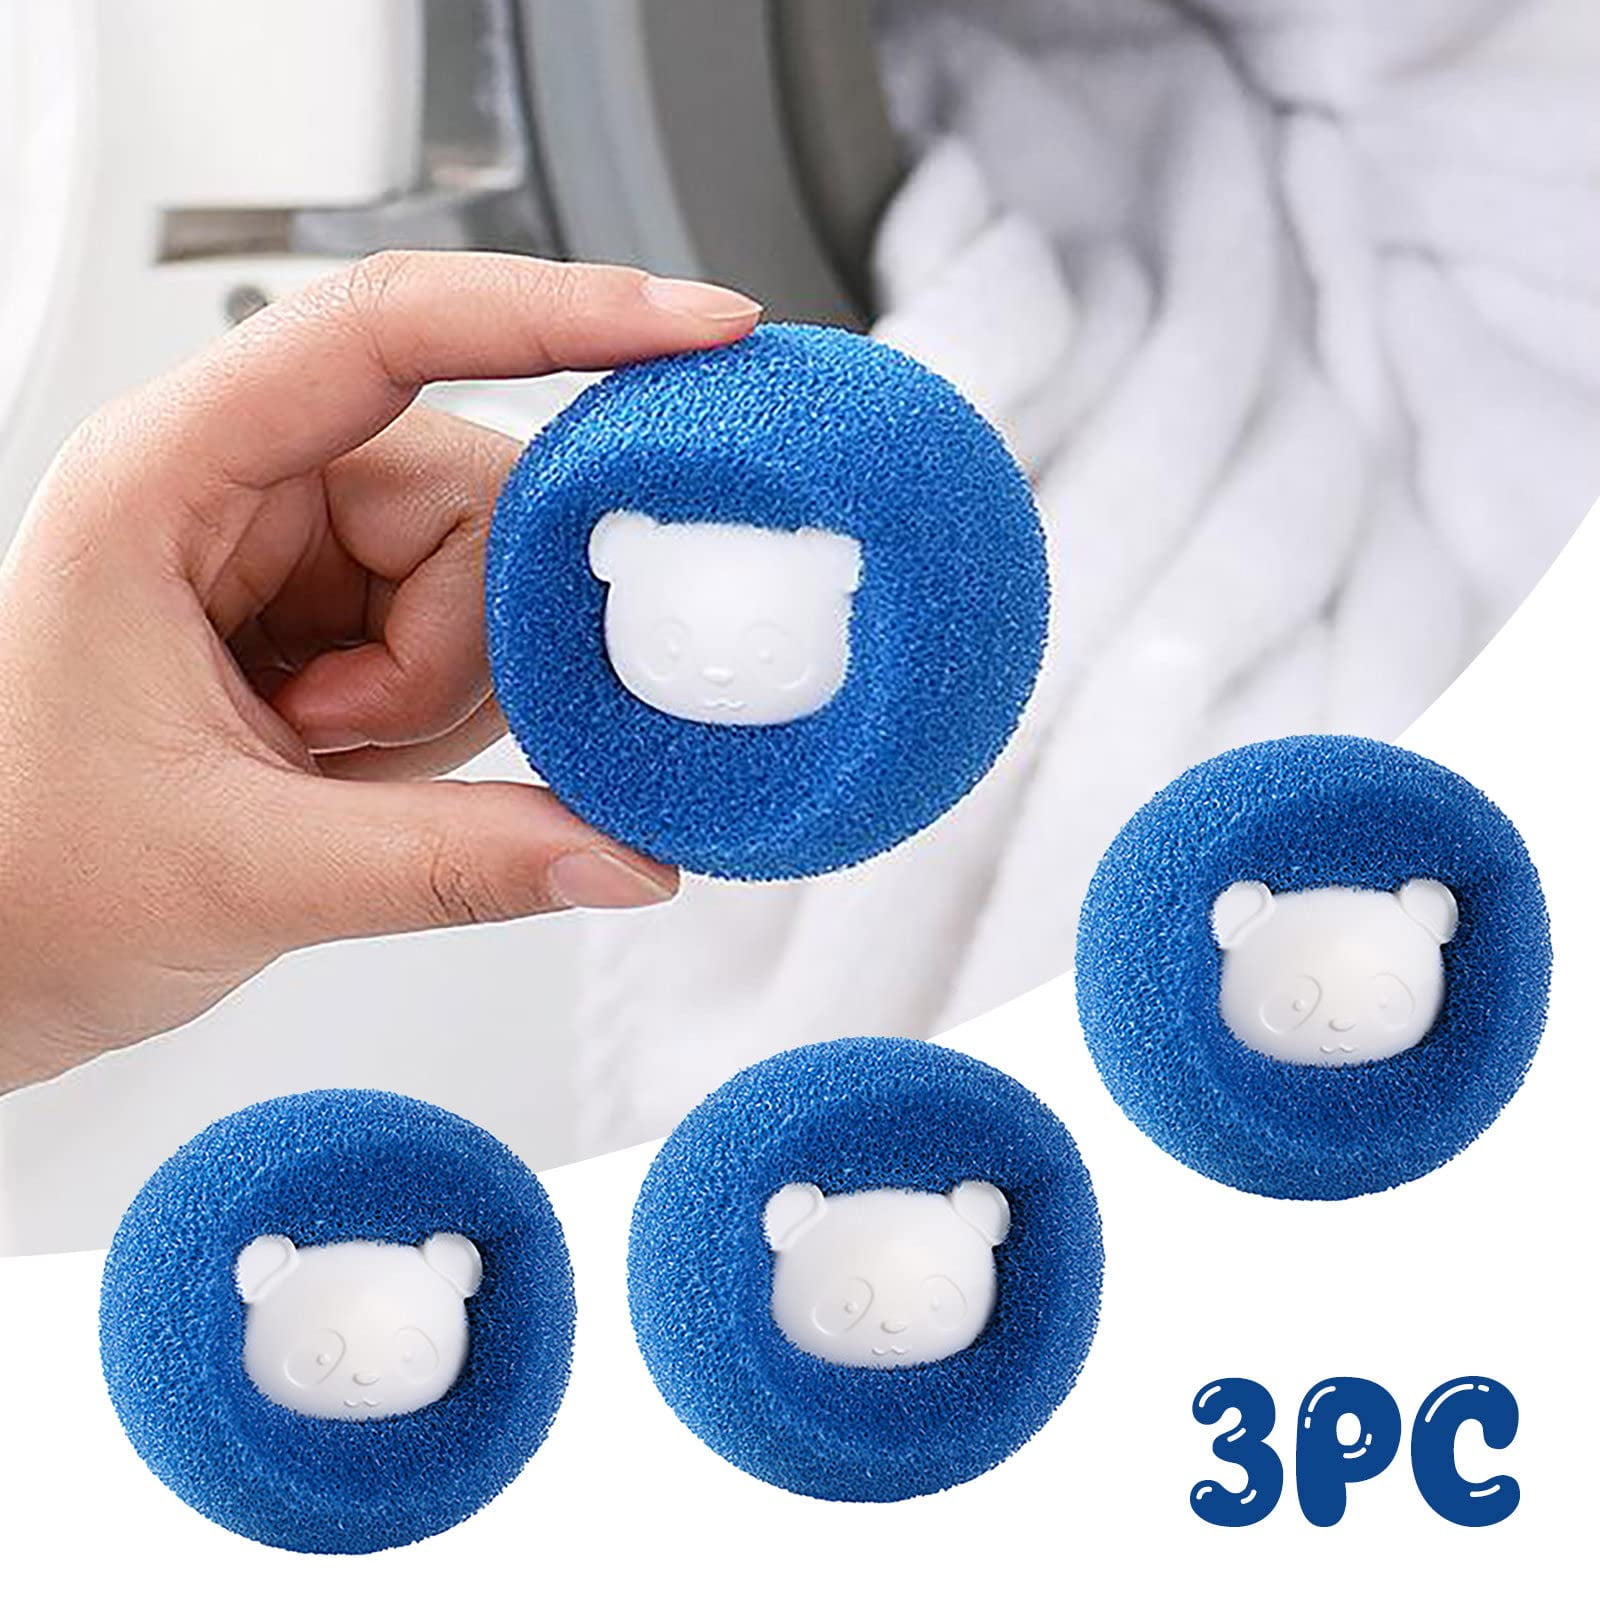 16pcs Laundry Pet Hair Remover Reusable Washing Hair Catcher Floating Pet  Hair Removal Balls Clothes Cleaning Accessories